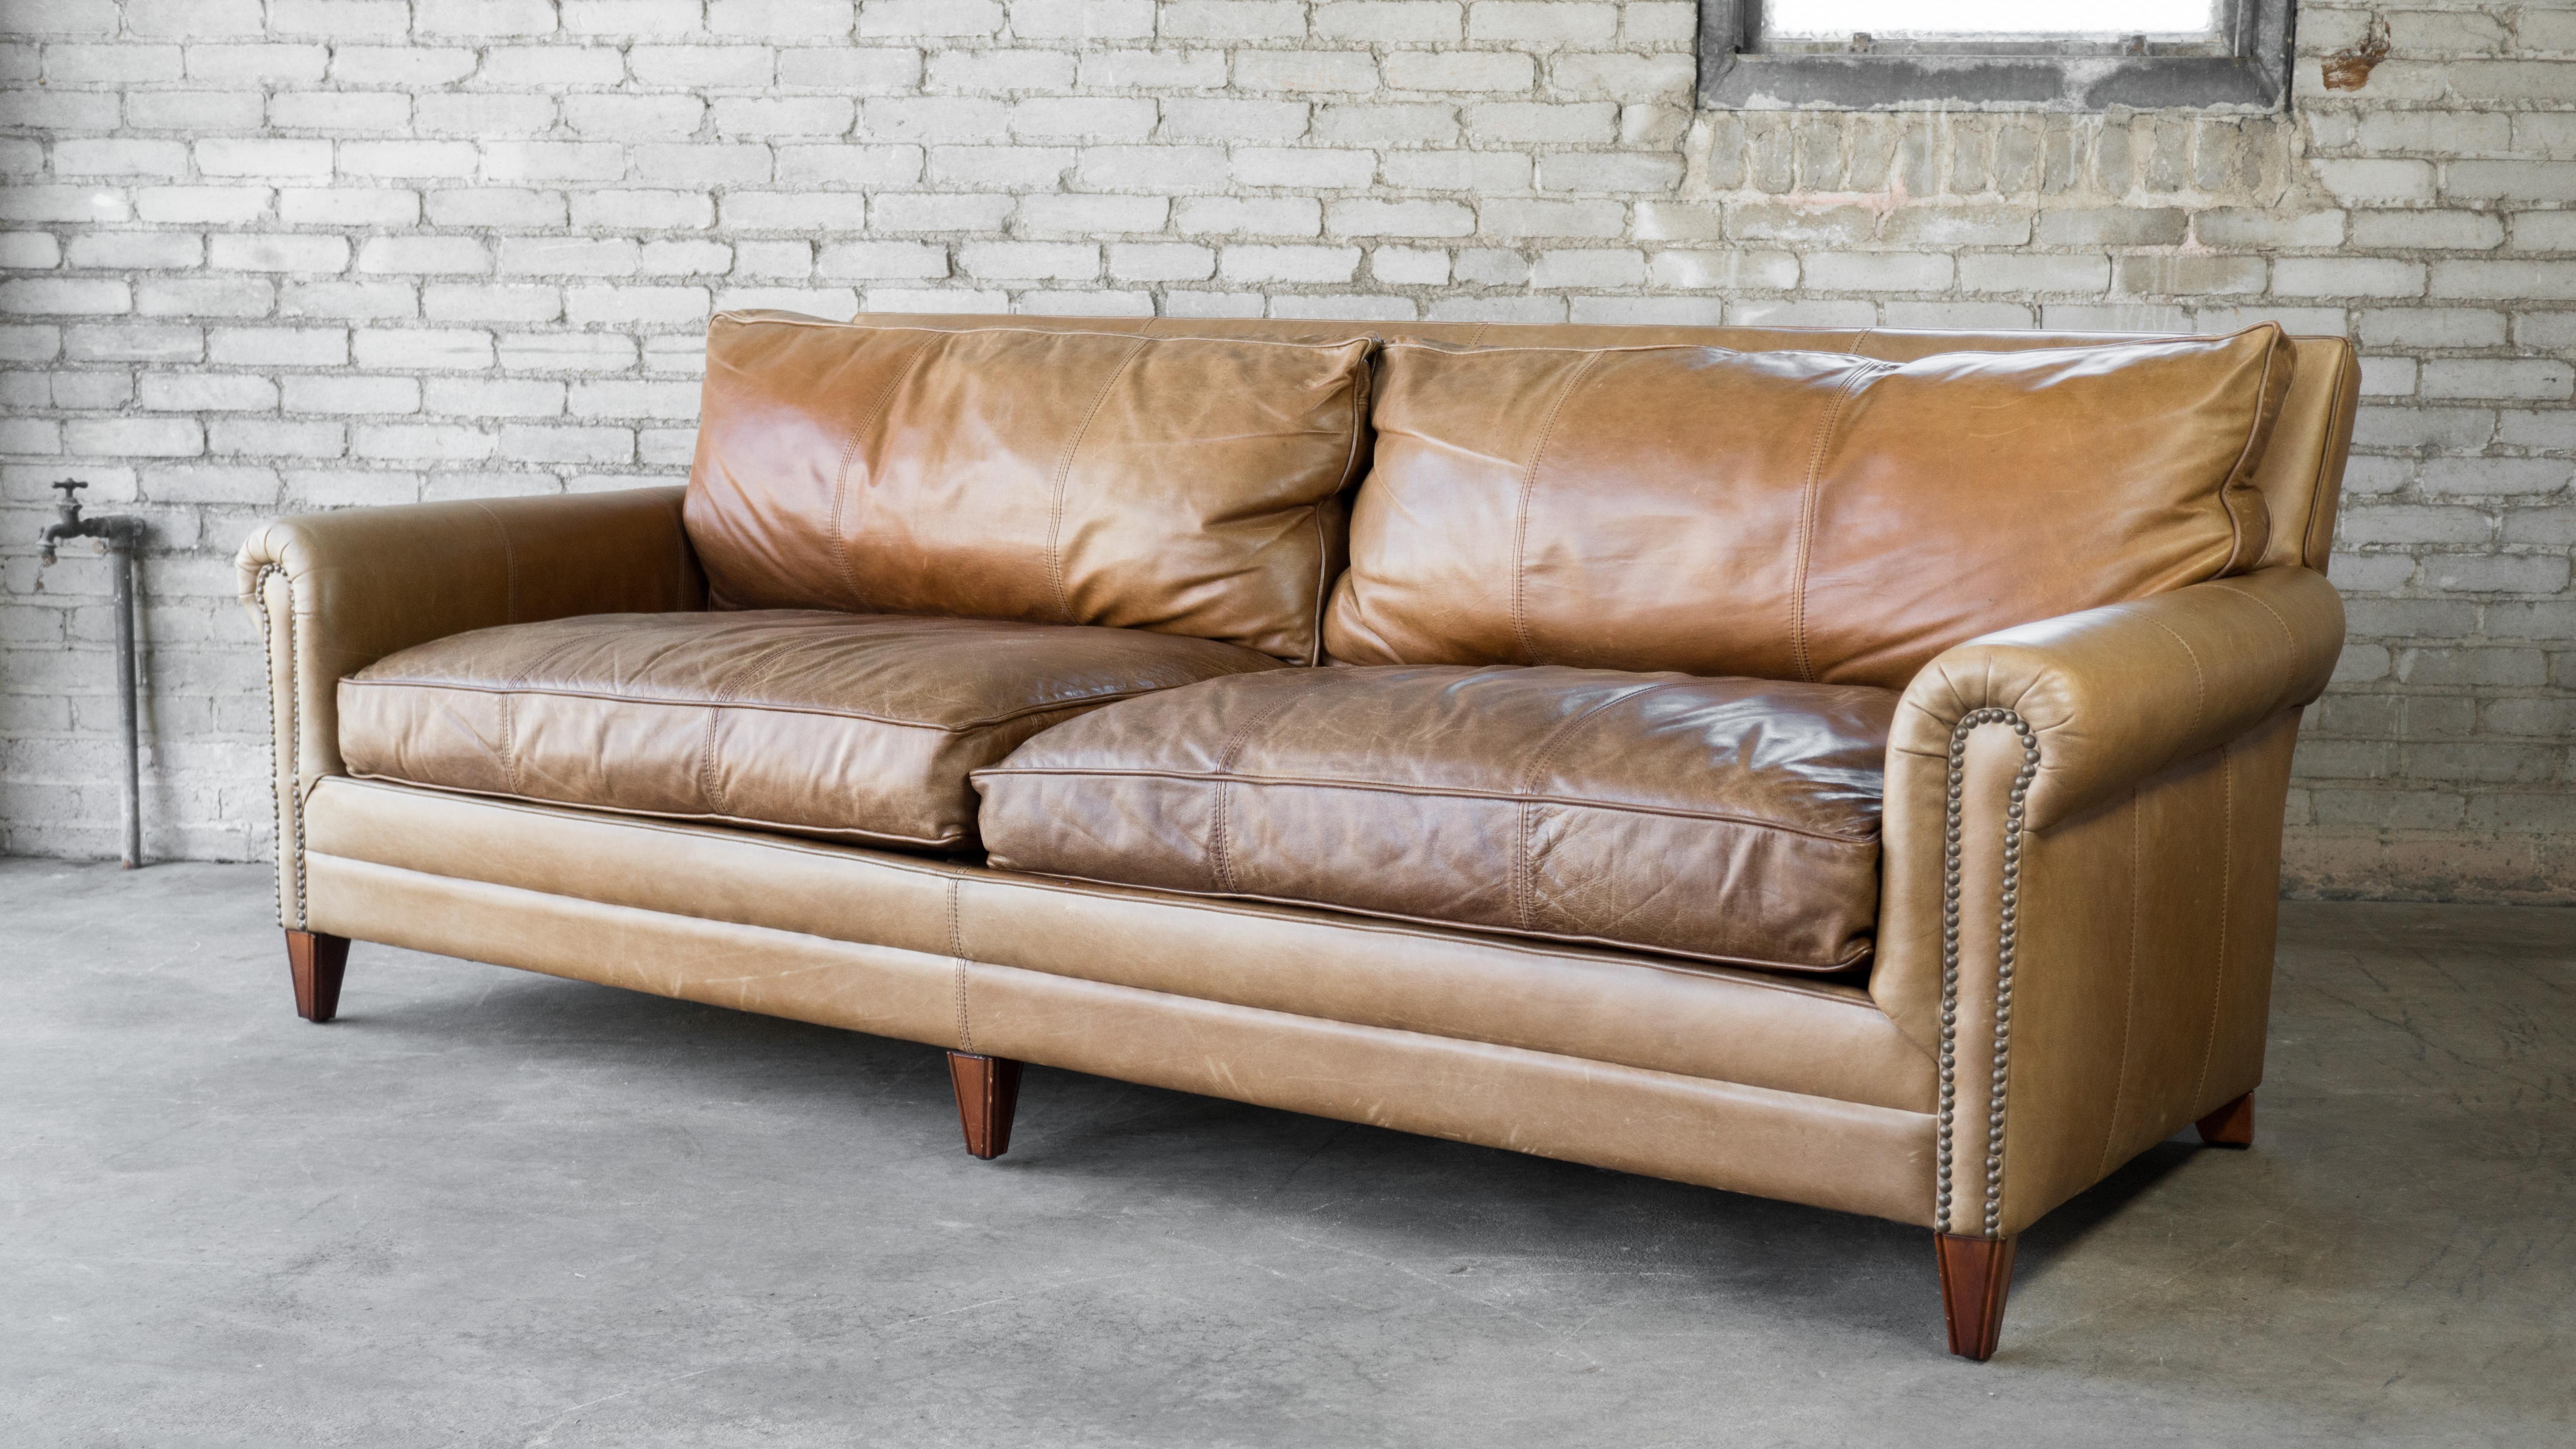 Gorgeous Ralph Lauren MacIntyre leather sofa. Wrapped in beautiful lightly distressed cigar brown leather with thick stitching details. Traditional English roll-arm style with paramount elegance and comfort. Brass nailhead trim. Oversized